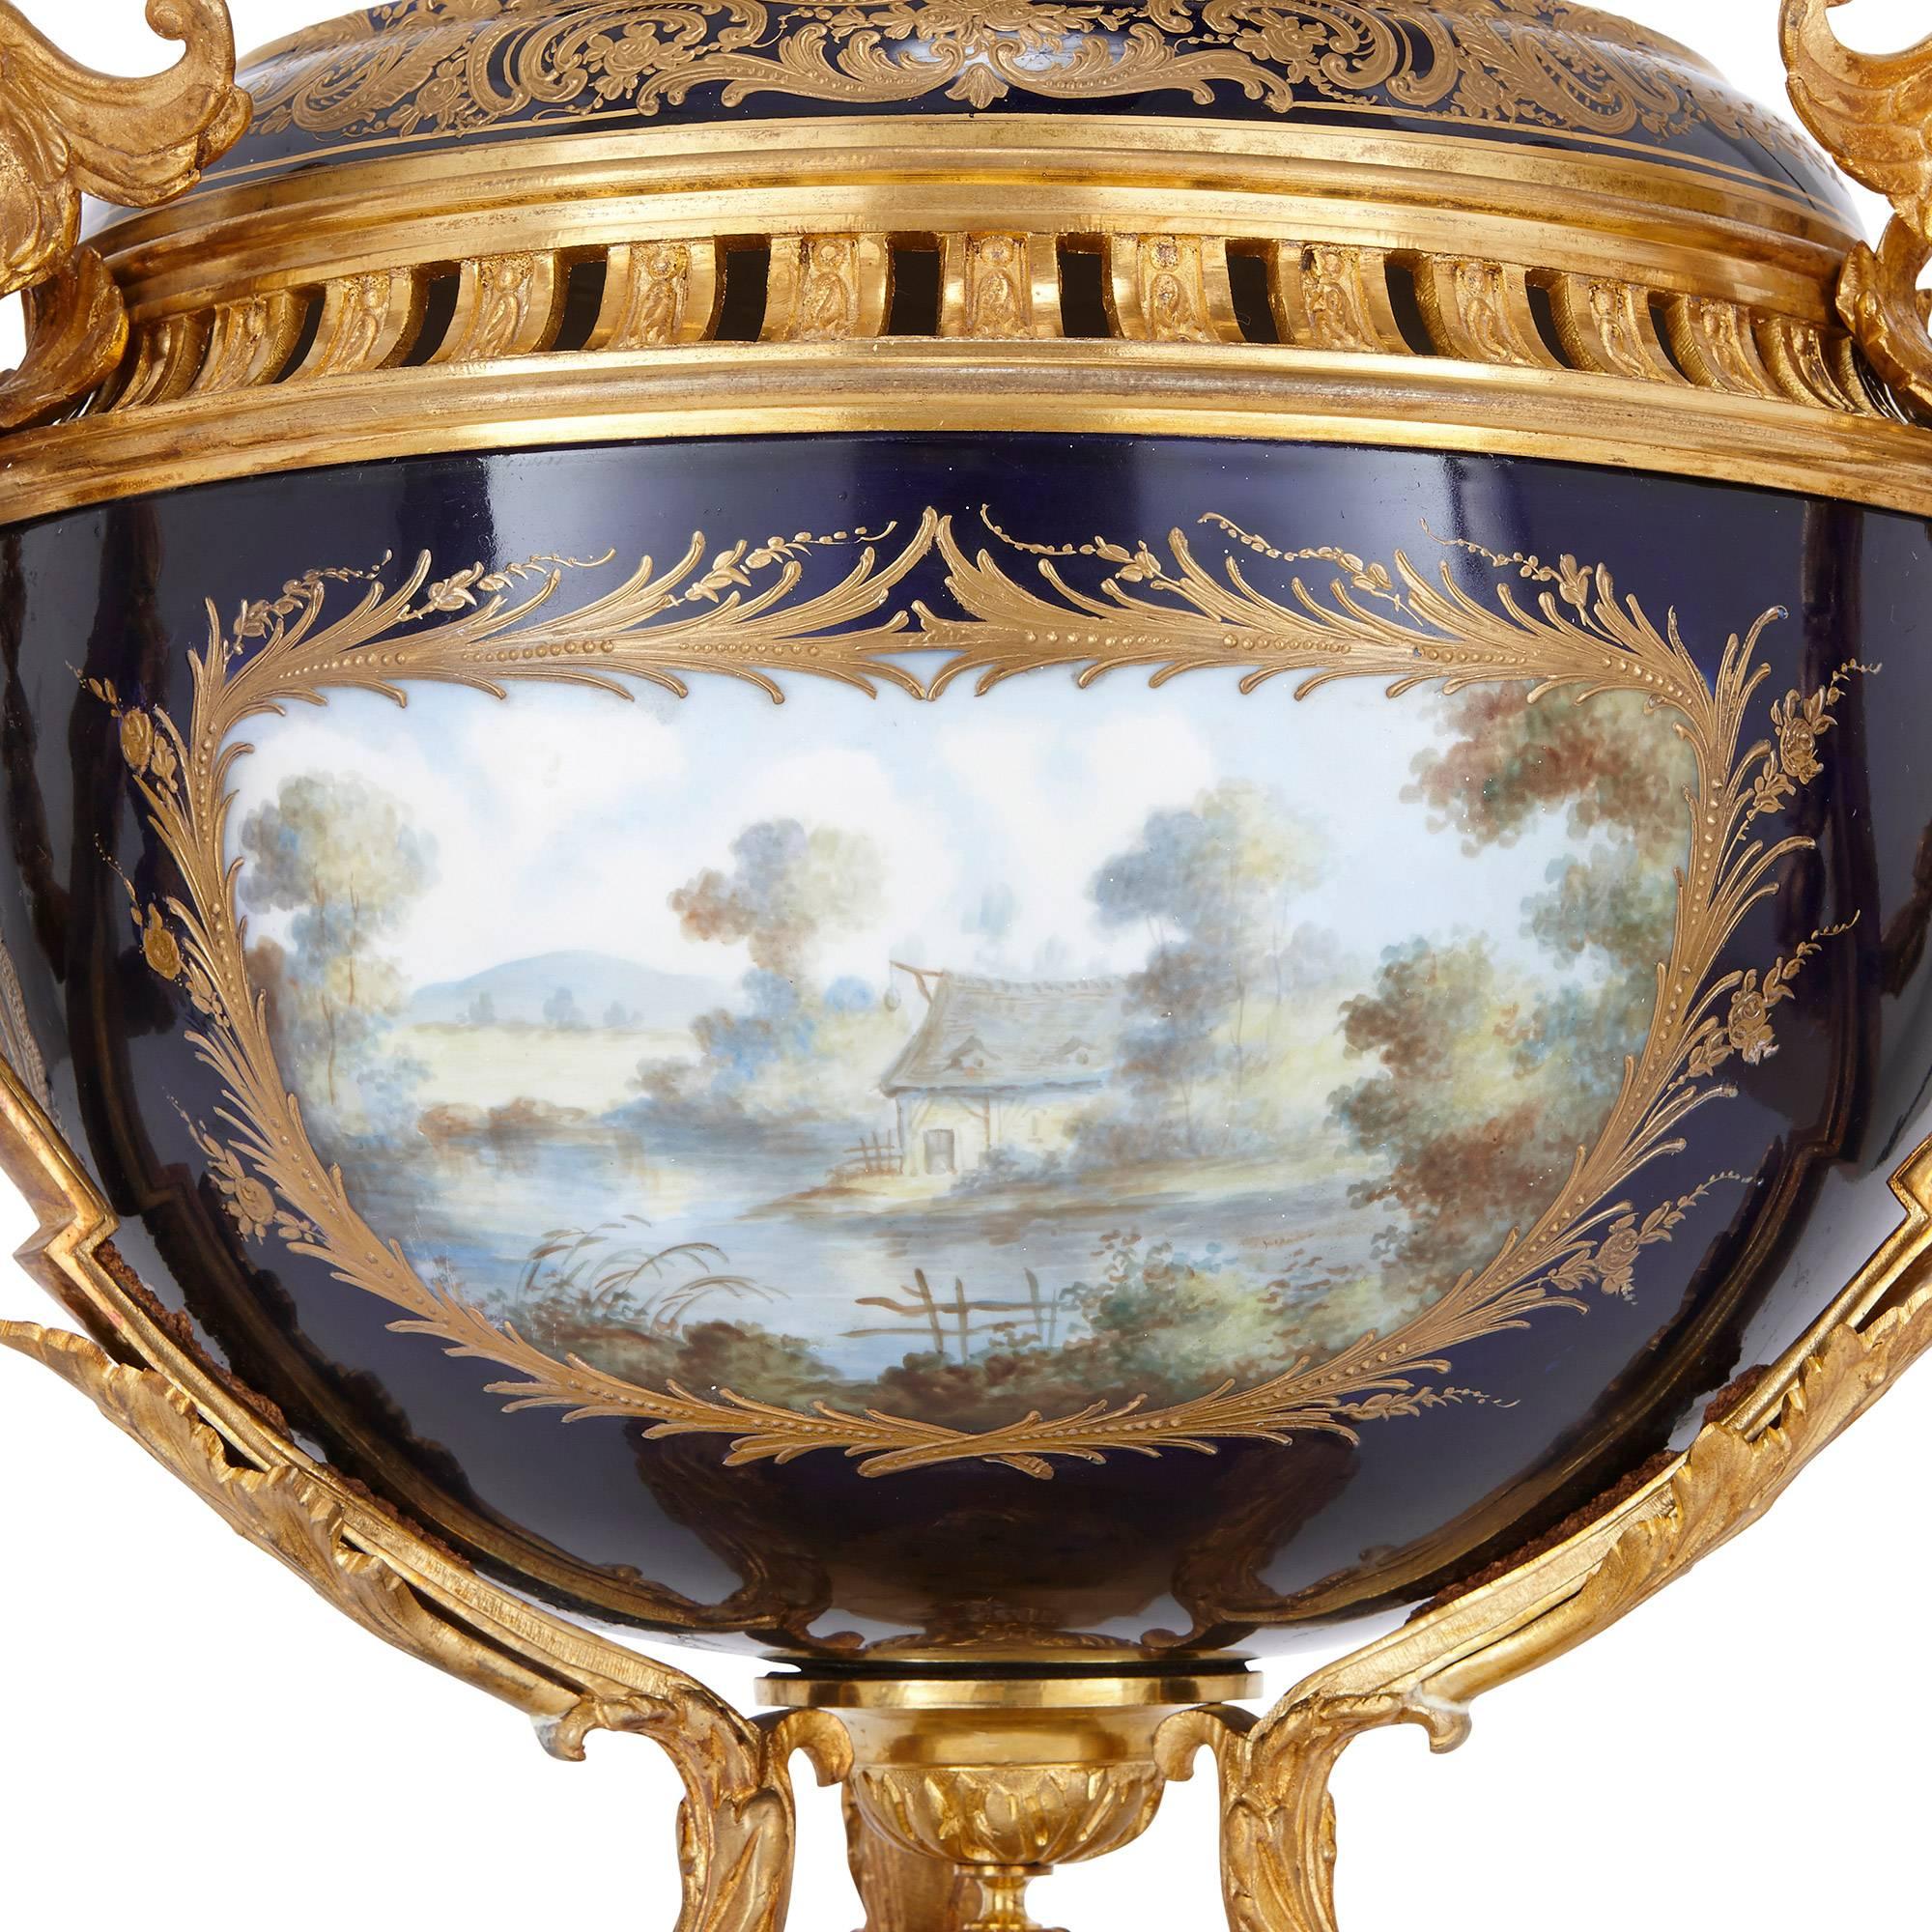 The dark blue ground body painted to the front with playful and amorous pastoral scenes, decorated throughout with gilt rocaille motif, mounted with twin ormolu handles shaped as winged classical female busts, surmounted by a shaped bulbous cover